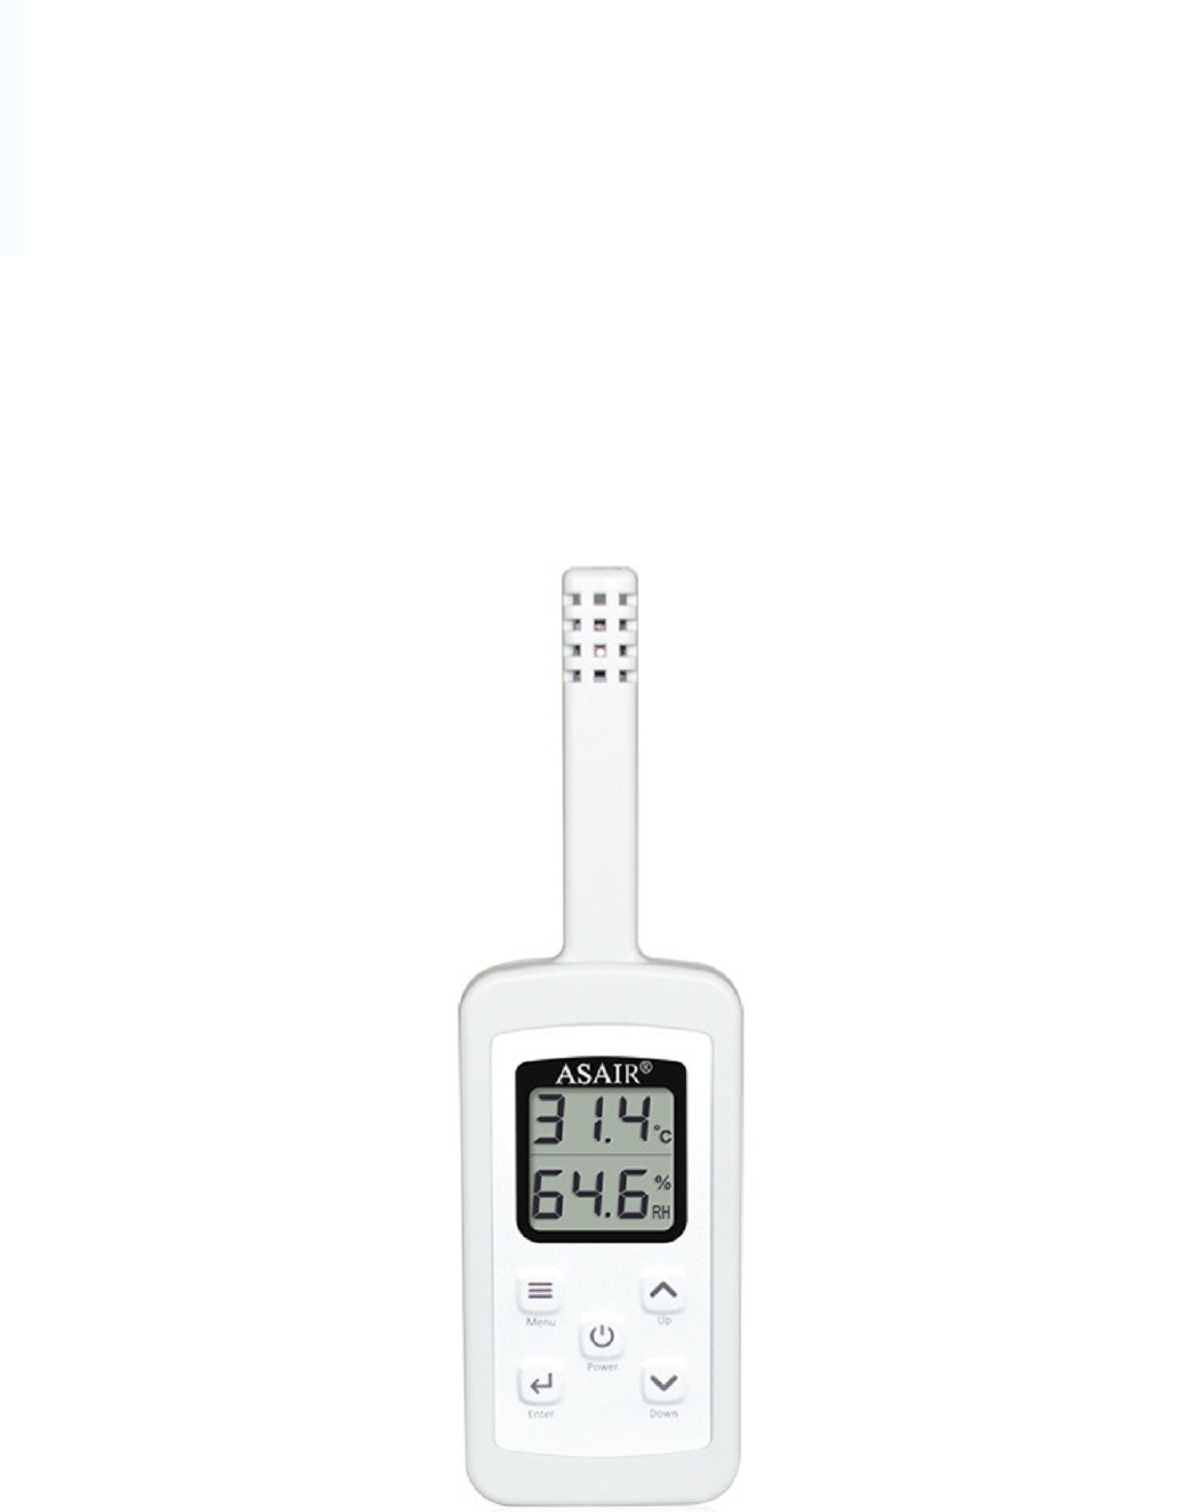 AH8006-Hand-held-Thermometer-and-Hygrometer-Detection-Instrument-Warehouse-Medical-Cold-Chain-Gas-In-1557308-5